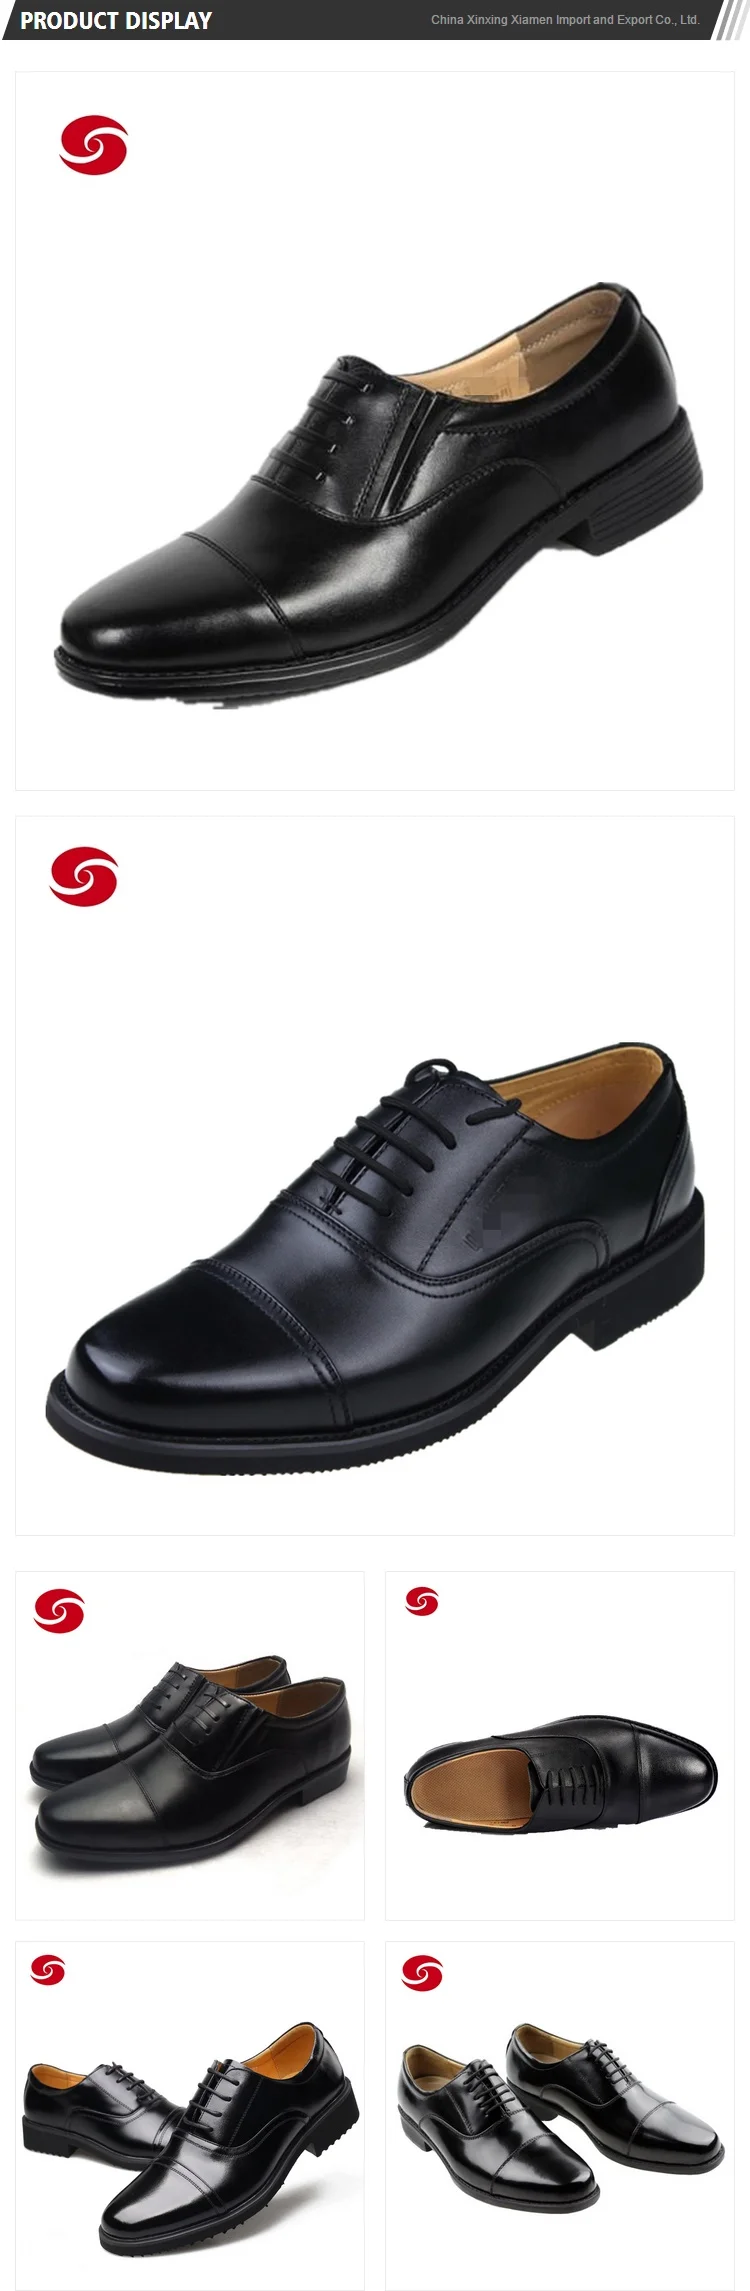 Best Quality High Gloss Military Black Shining Shoes Police Officer ...